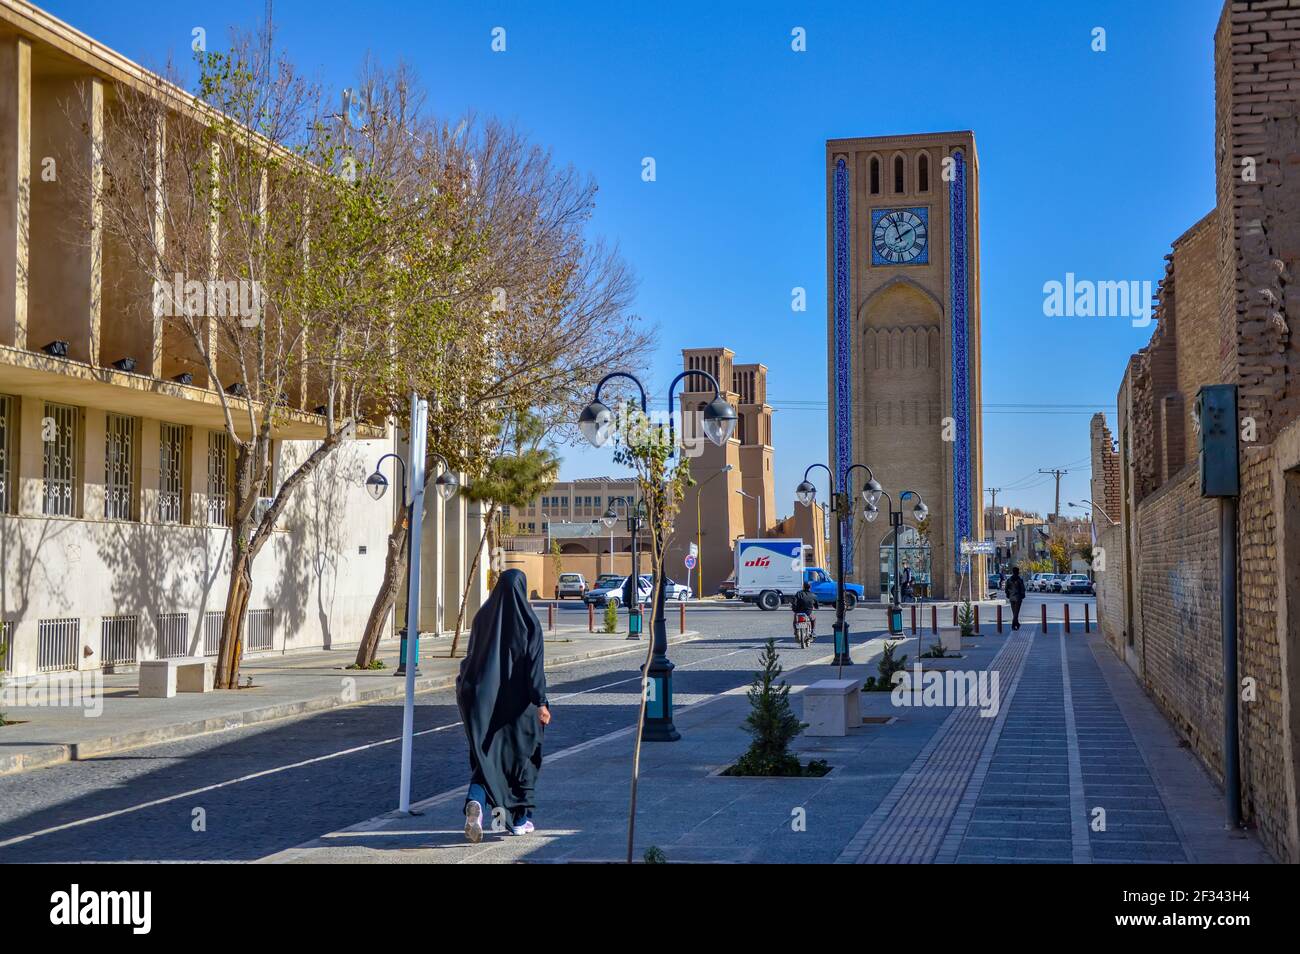 Yazd, Iran - December 5, 2015: Unidentified Iranian woman in chador walking in one of the streets of Yazd in Iran Stock Photo